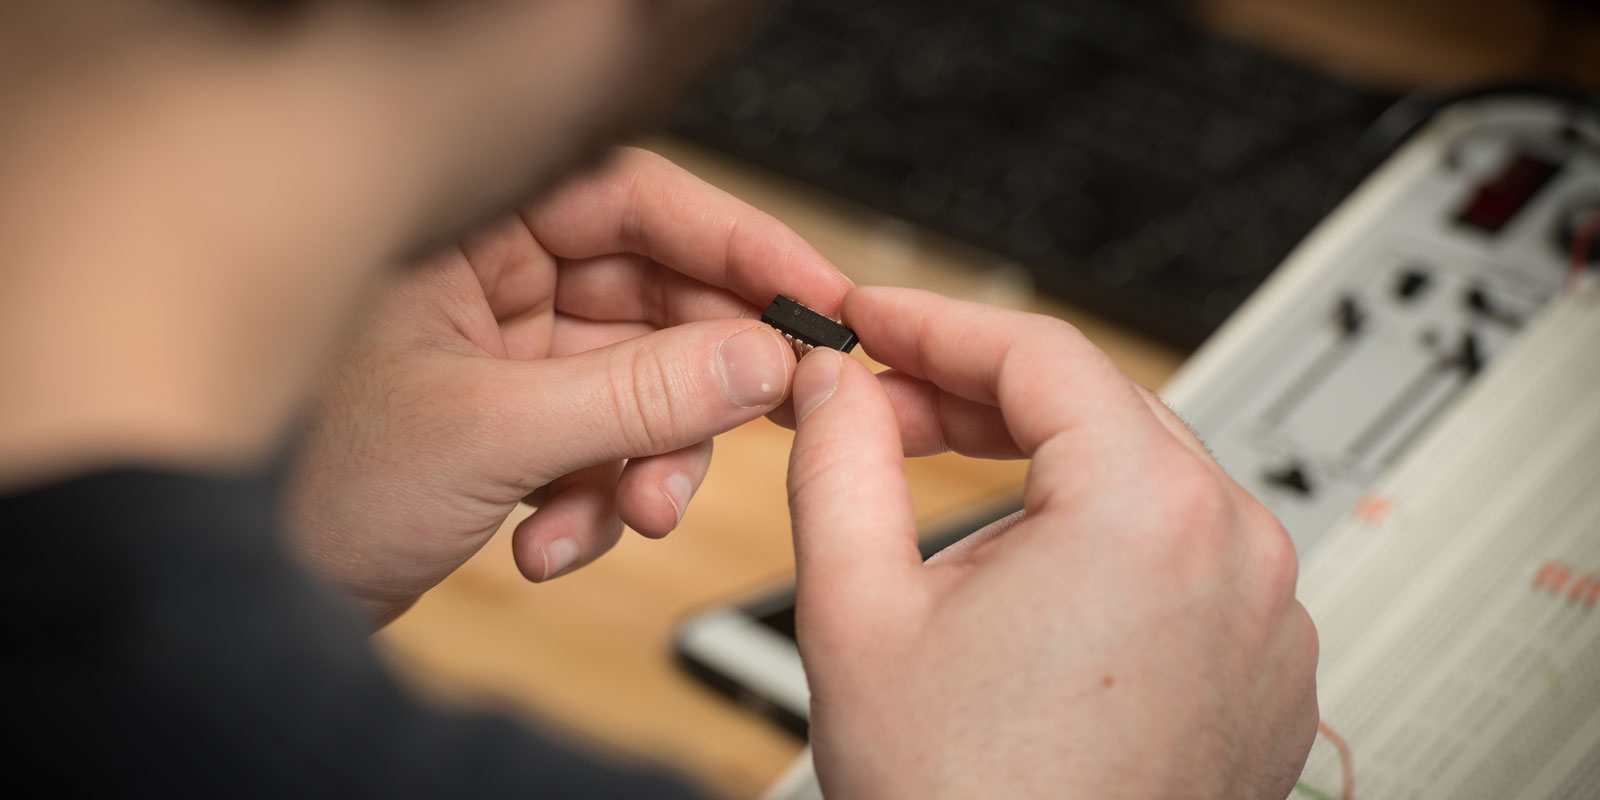 A student working with a microchip